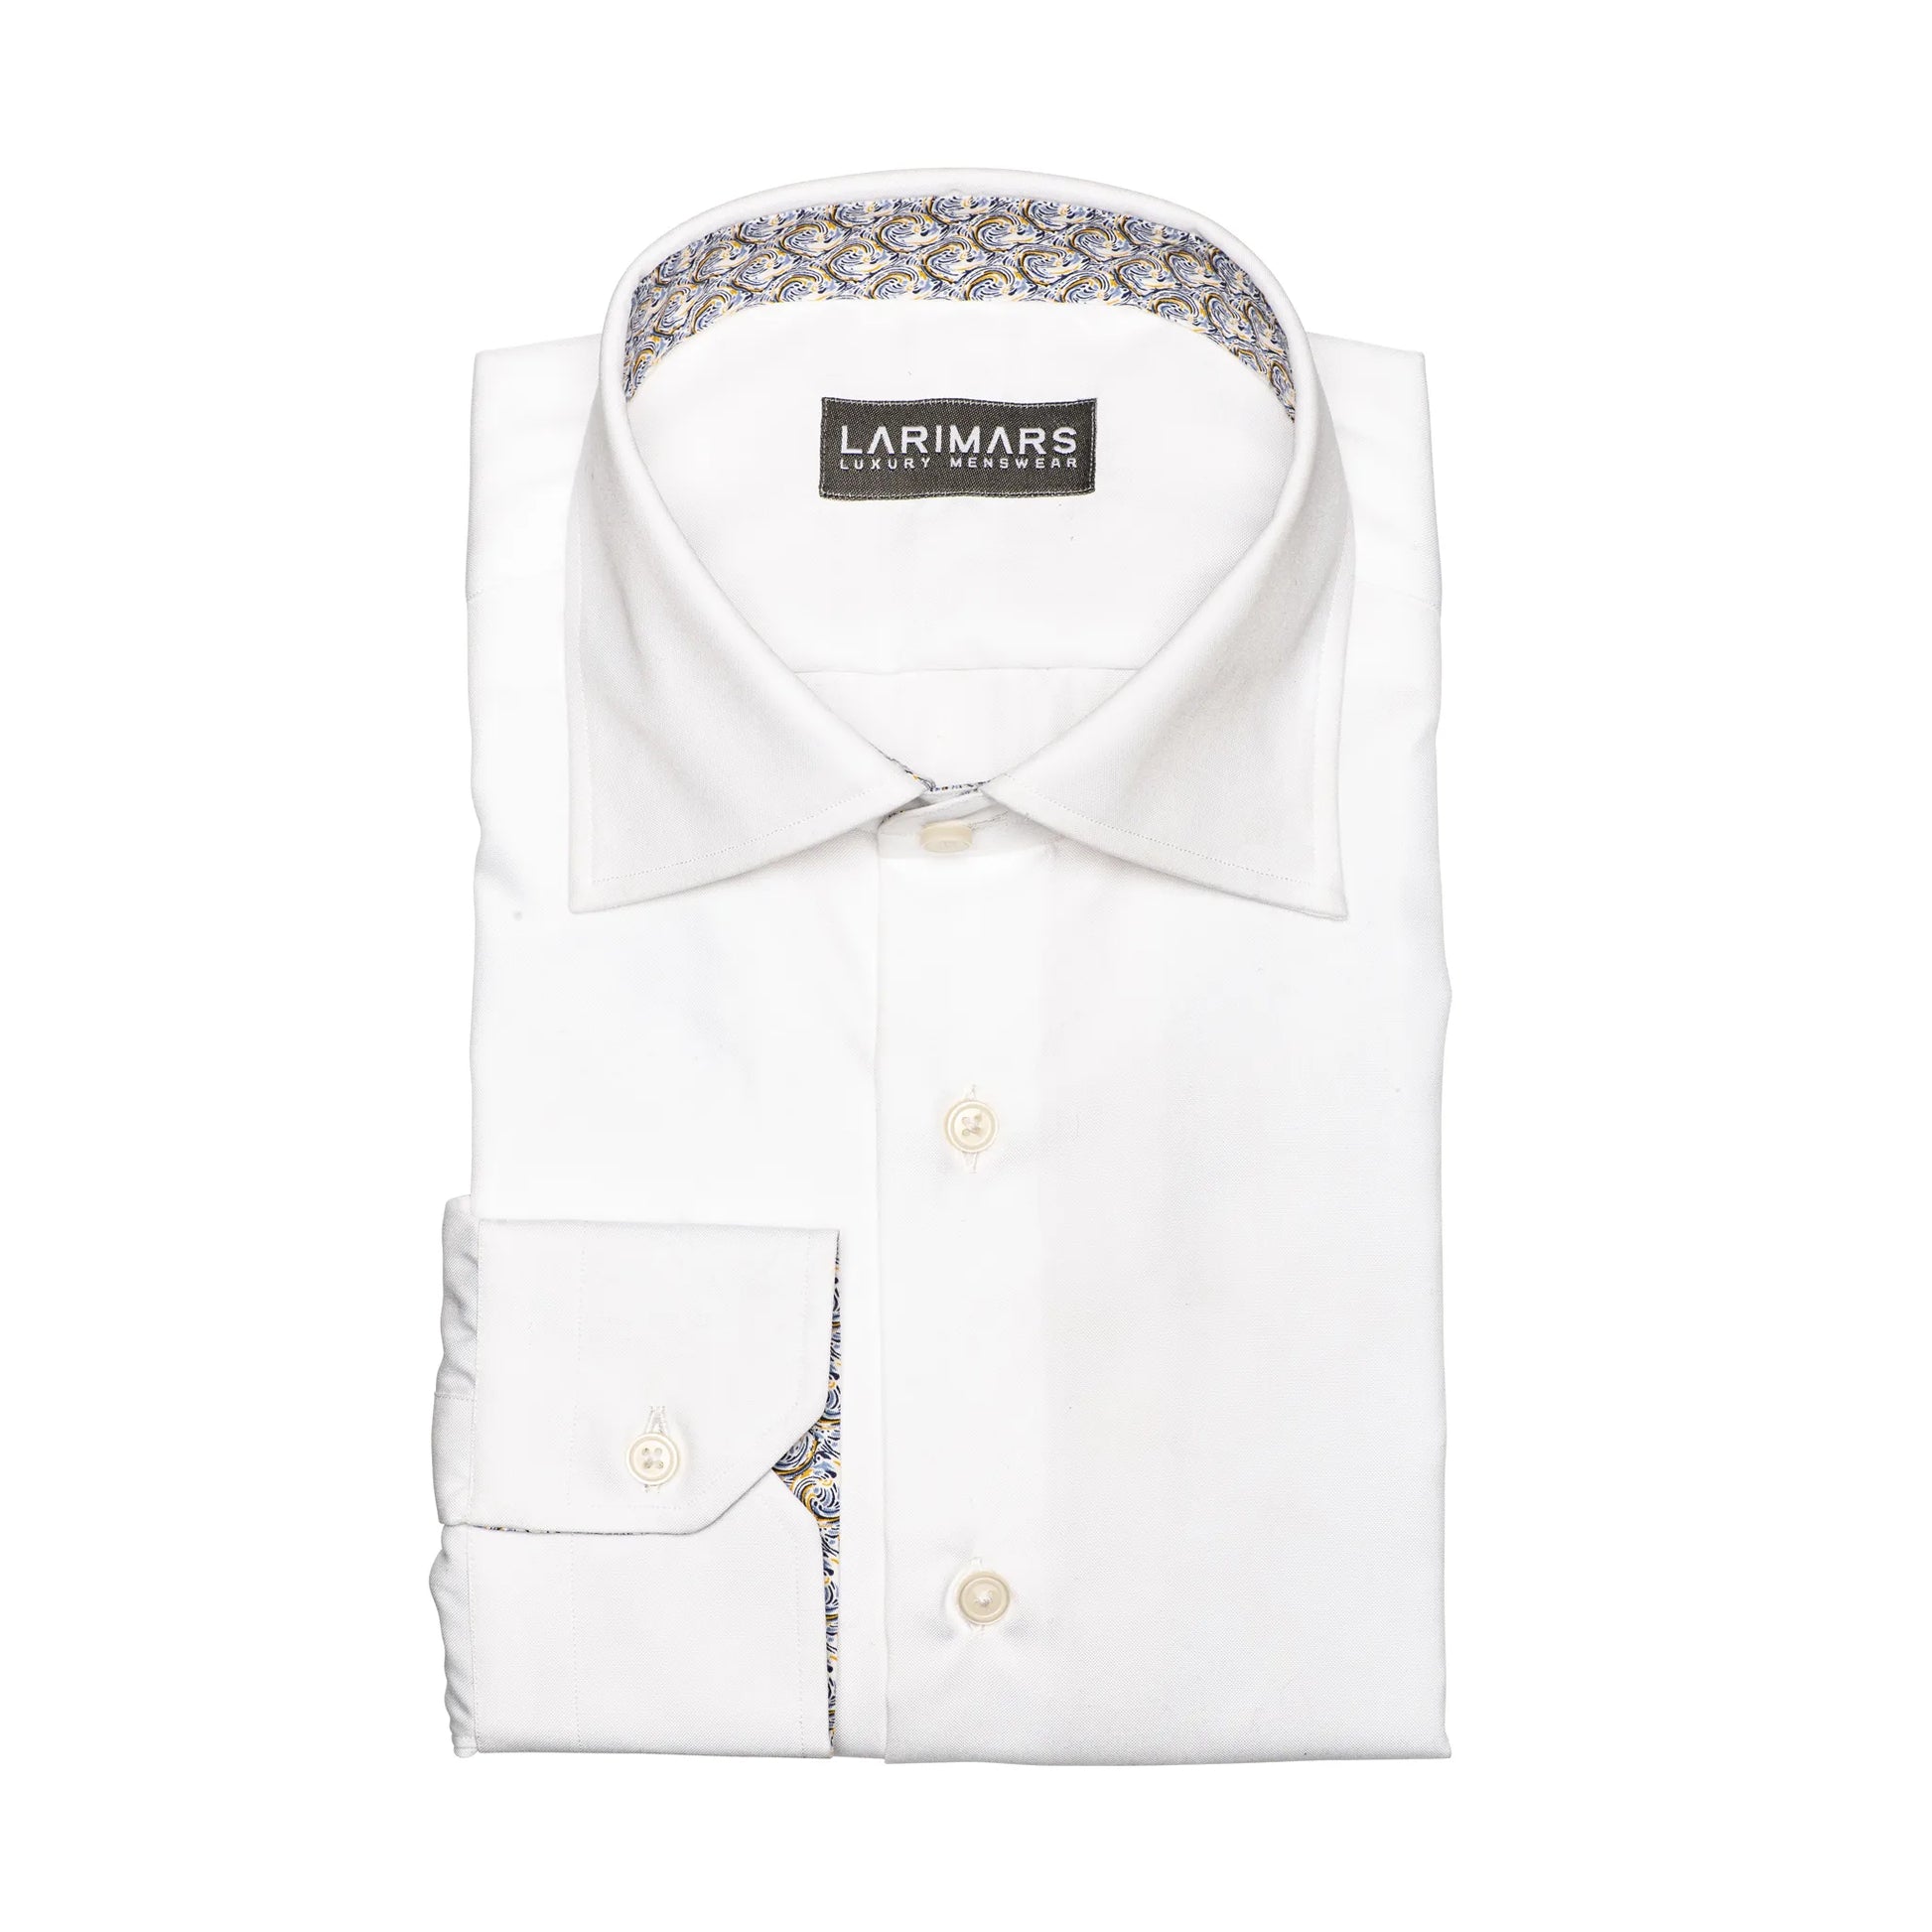 Snow White Dobby Texture - Larimars Clothing Men's Formal and casual wear shirts